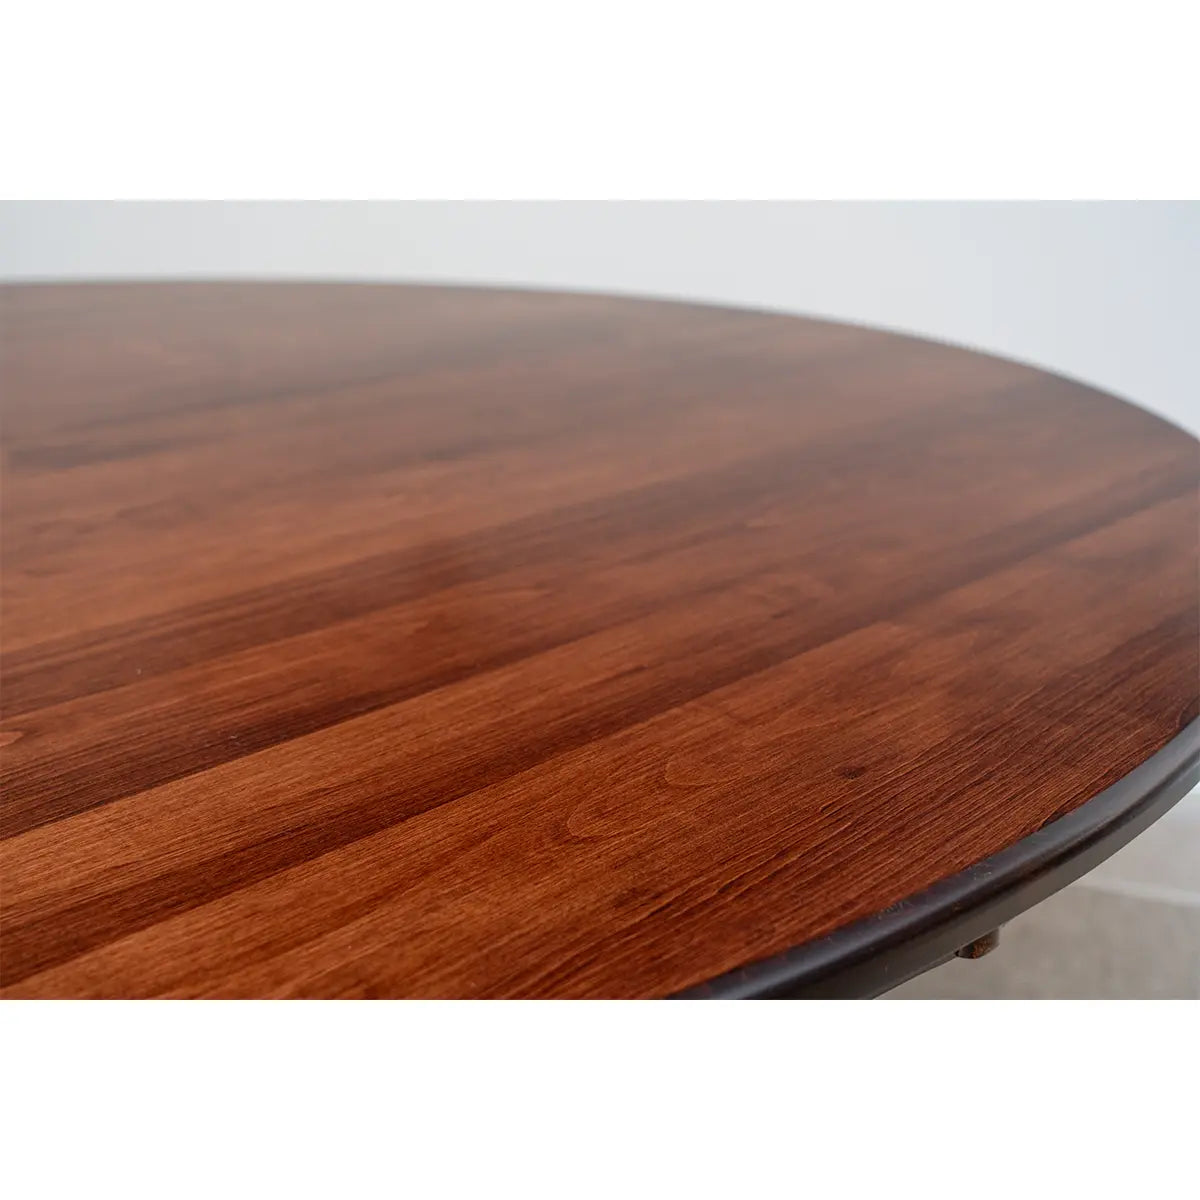 Details of Brown Maple Wood Table